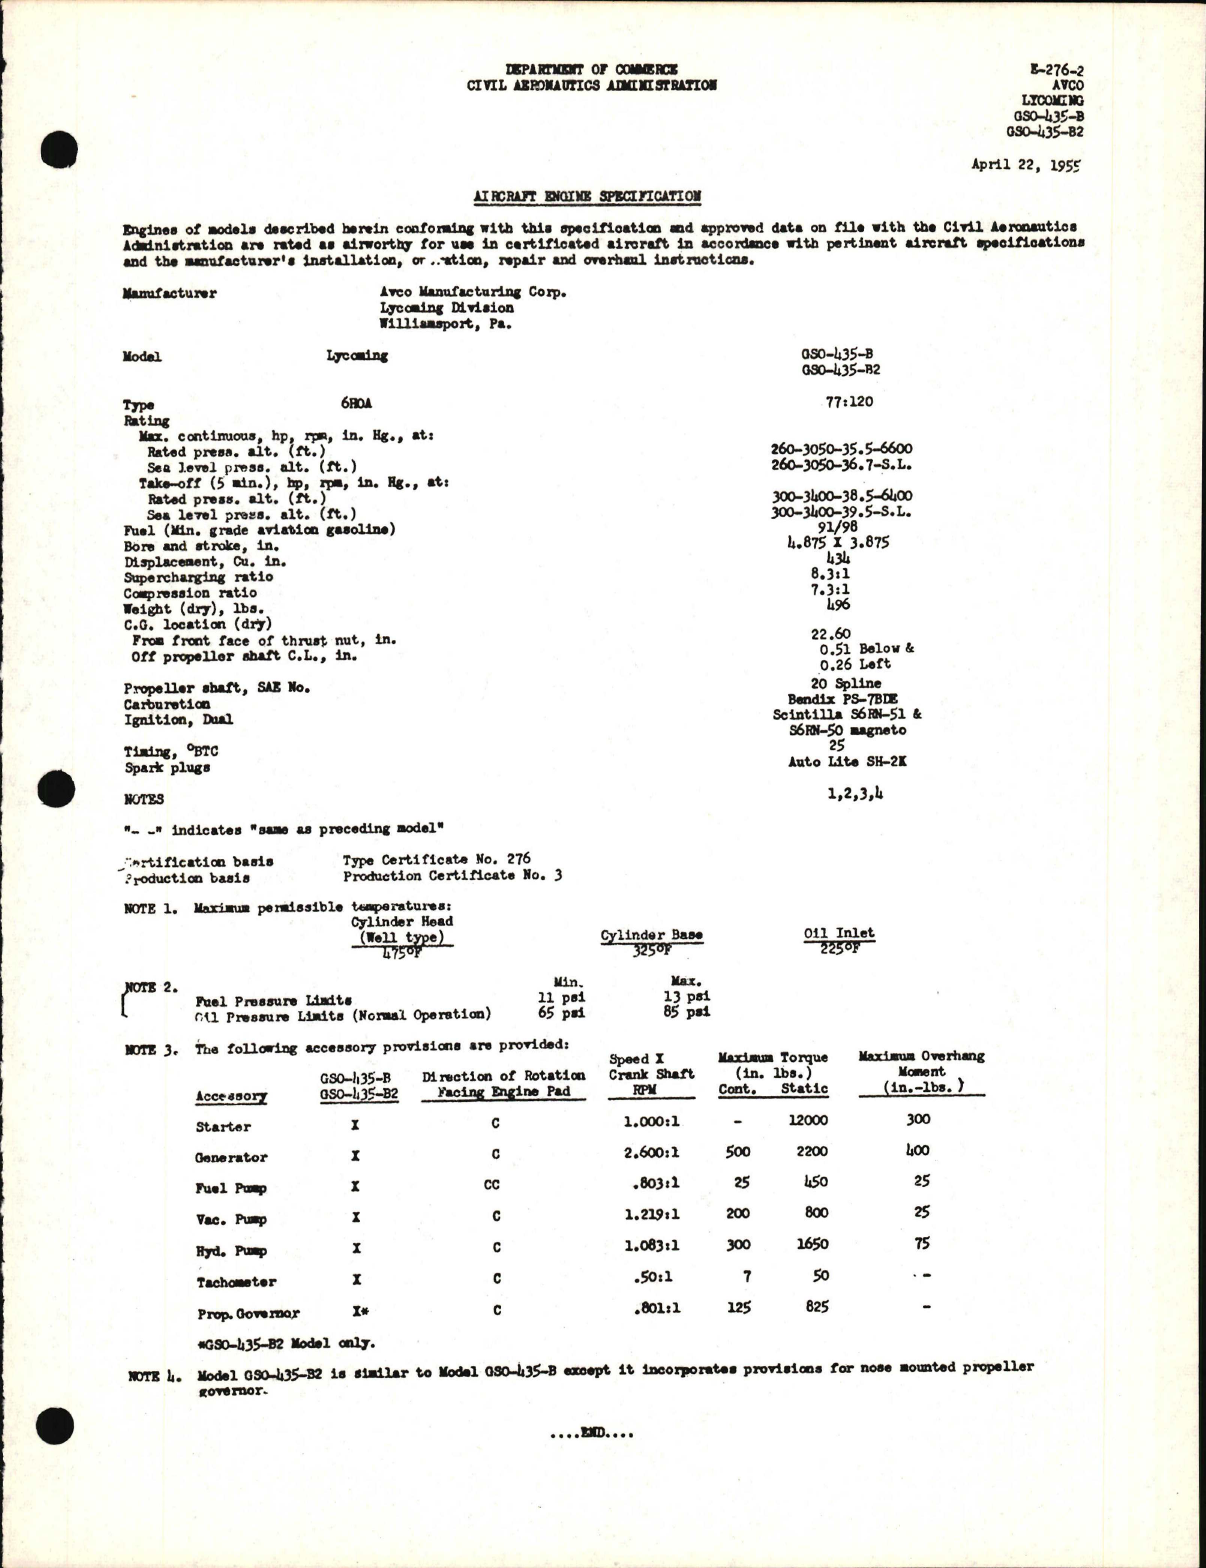 Sample page 1 from AirCorps Library document: GSO-435-B and GSO-435-B2